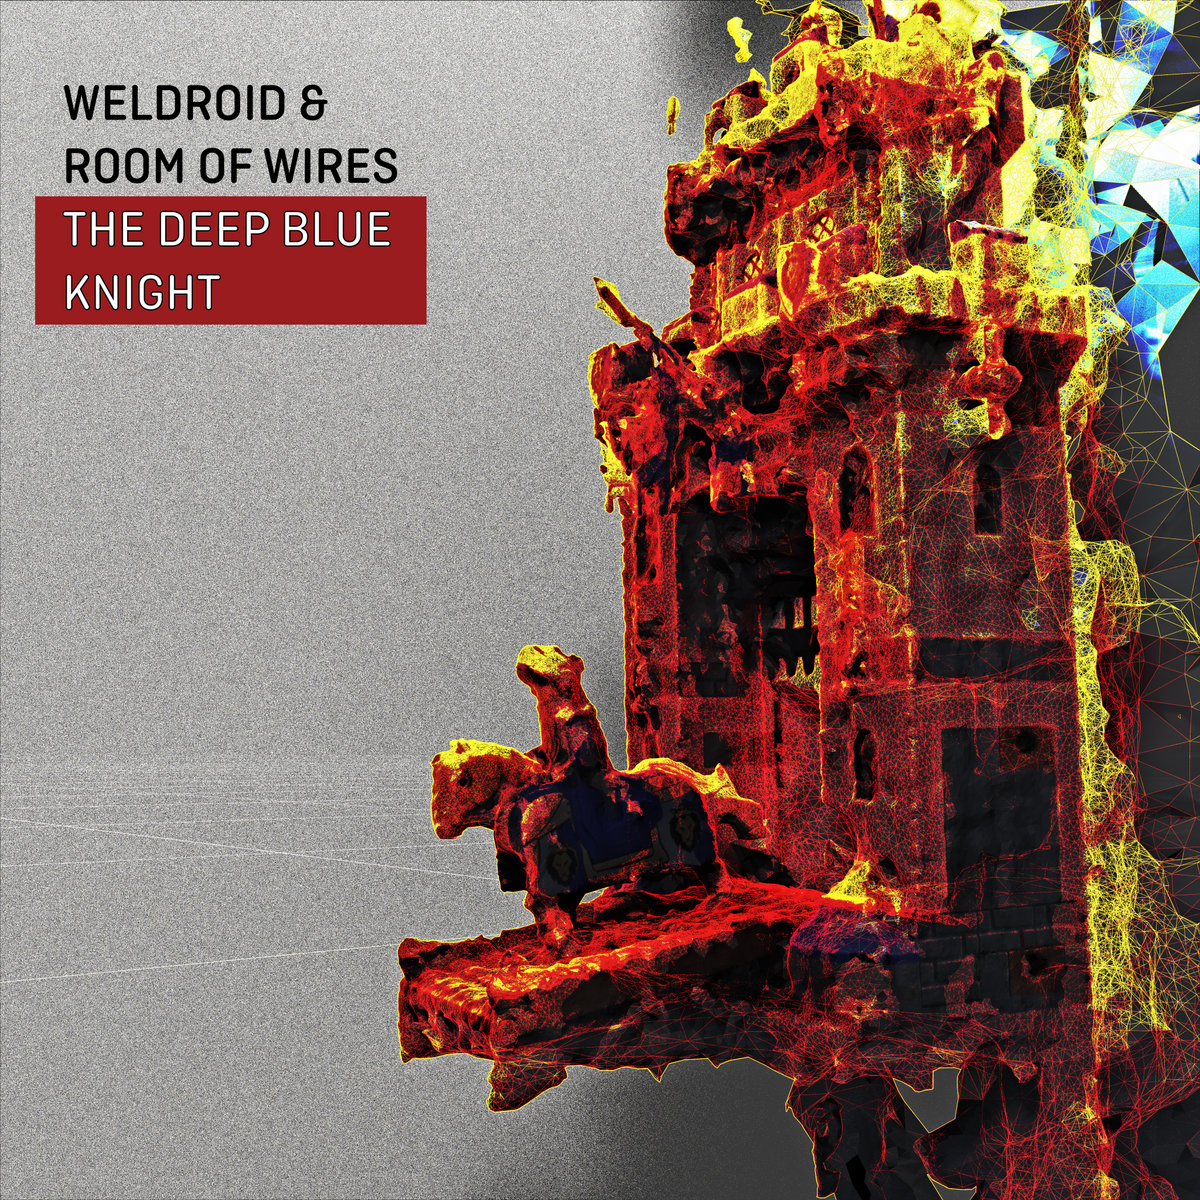 The Deep Blue Knight - 5 track EP by Weldroid & Room of Wires